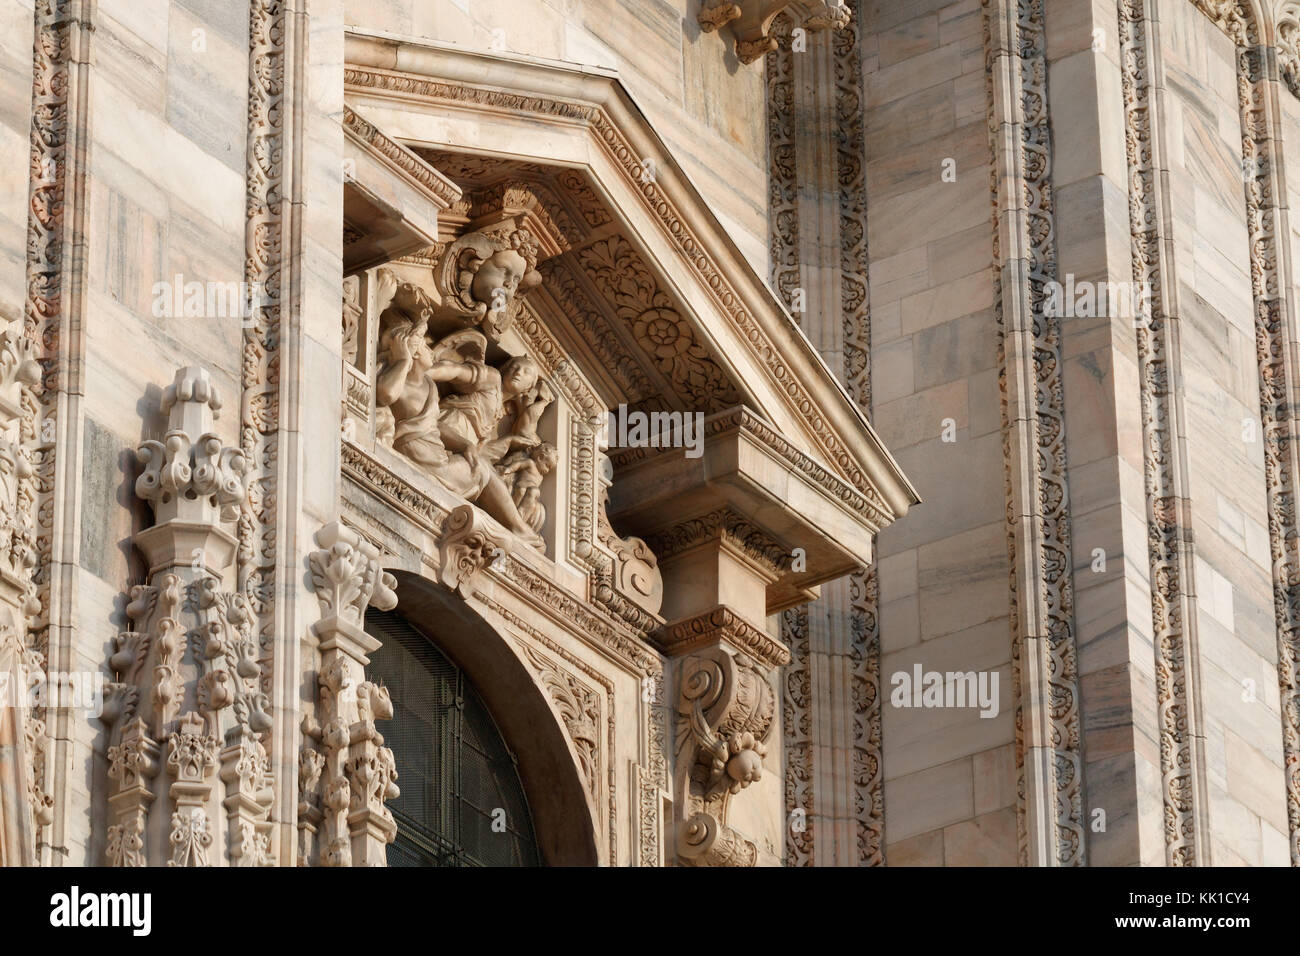 View of architectural details on the massive gothic cathedral Duomo, Milan, Italy Stock Photo